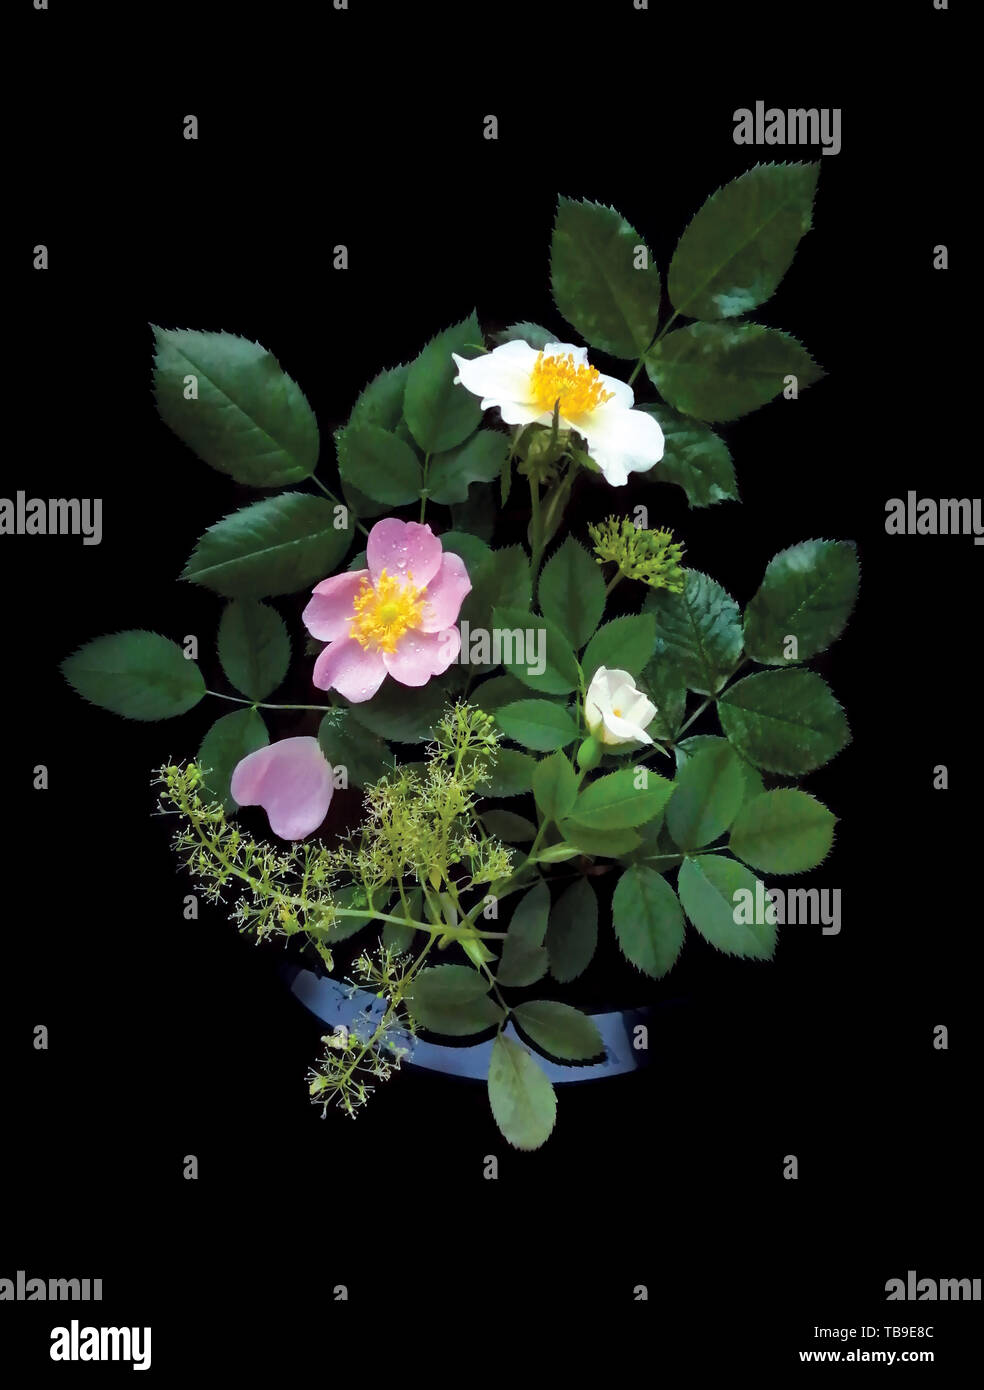 White and pink flowers, wild rose with greens on a black background, decorative poster for the interior. Stock Photo